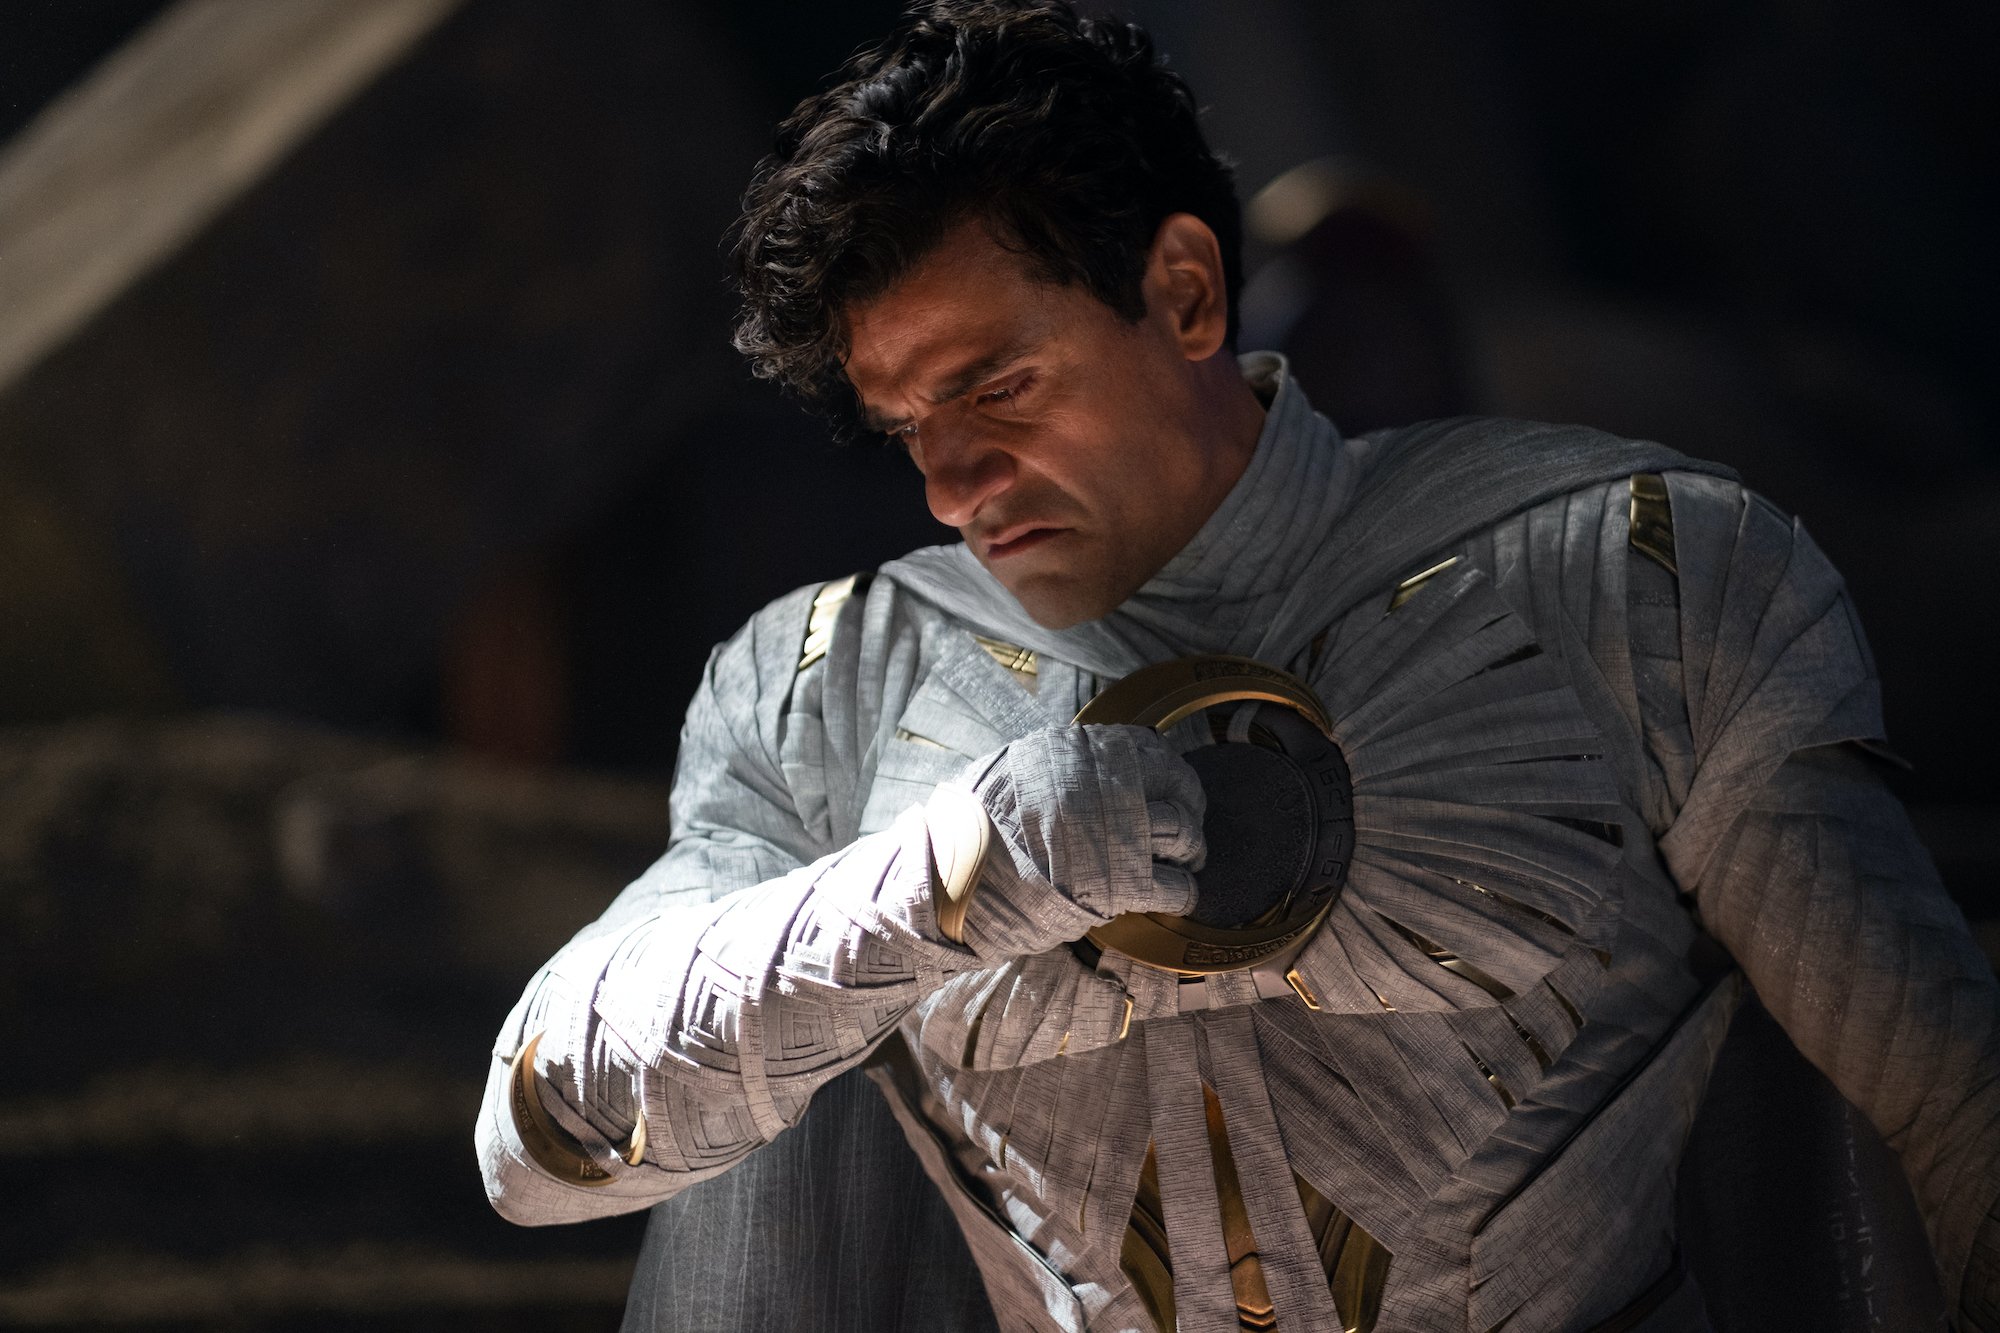 Oscar Isaac as Marc Spector/Steven Grant in 'Moon Knight,' which hasn't been renewed for season 2. He's wearing the grey suit and holding a moon-shaped weapon to his chest.